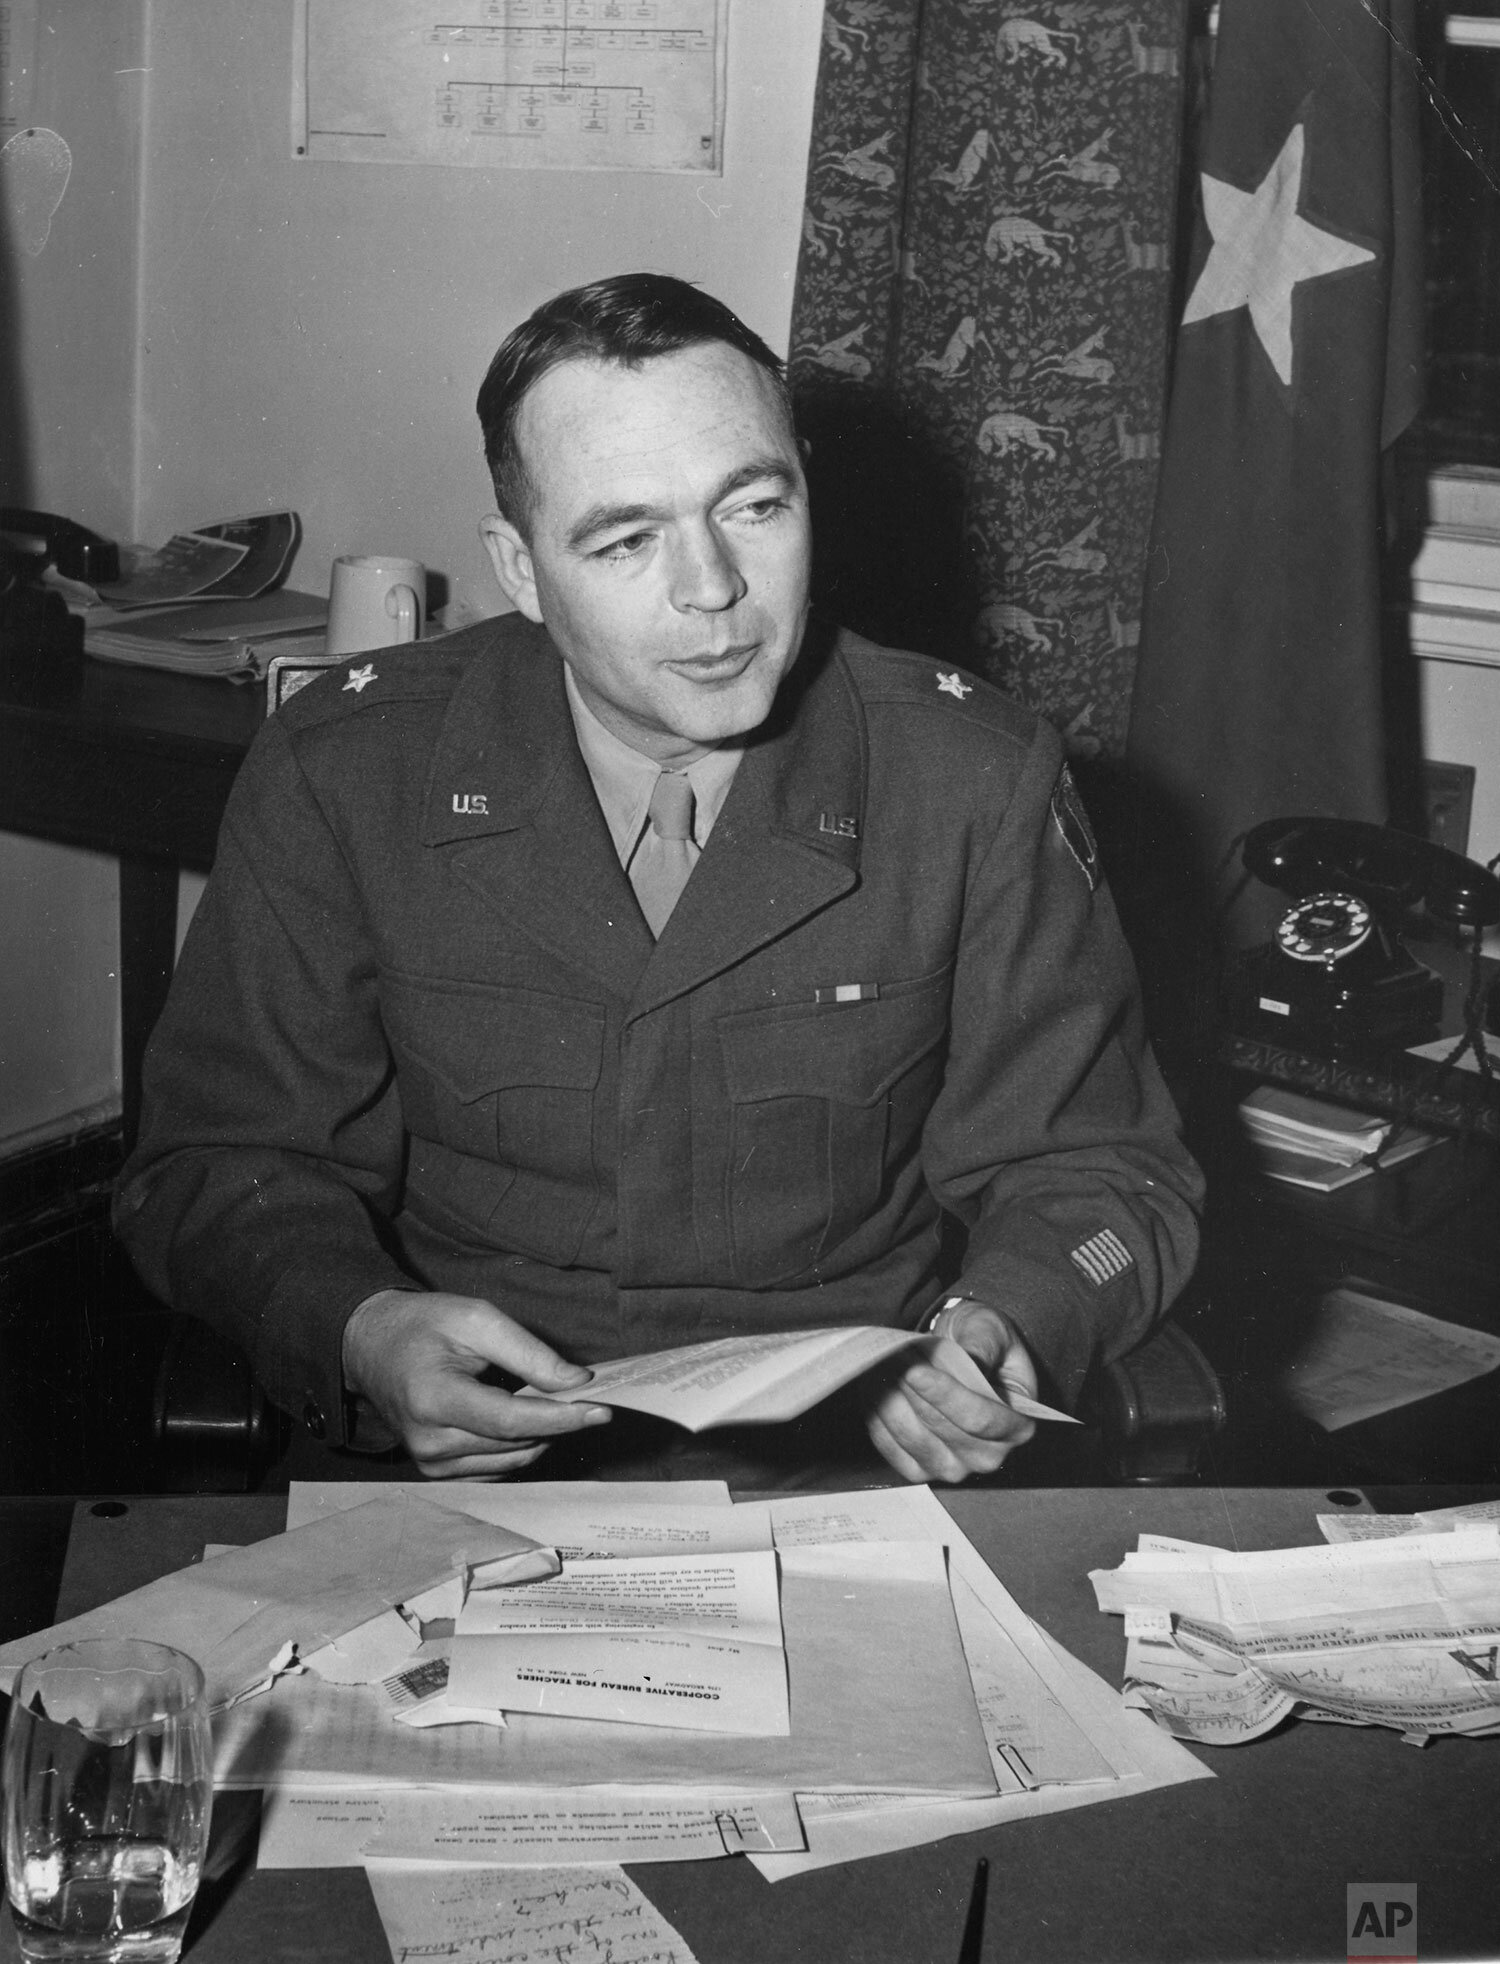  Portrait of U.S. General Telford Taylor, chief prosecutor for war crimes at the International Military Tribunal in Nuremberg, Germany, in his office March 5, 1948. (AP Photo/Hanns J. Jaeger) 